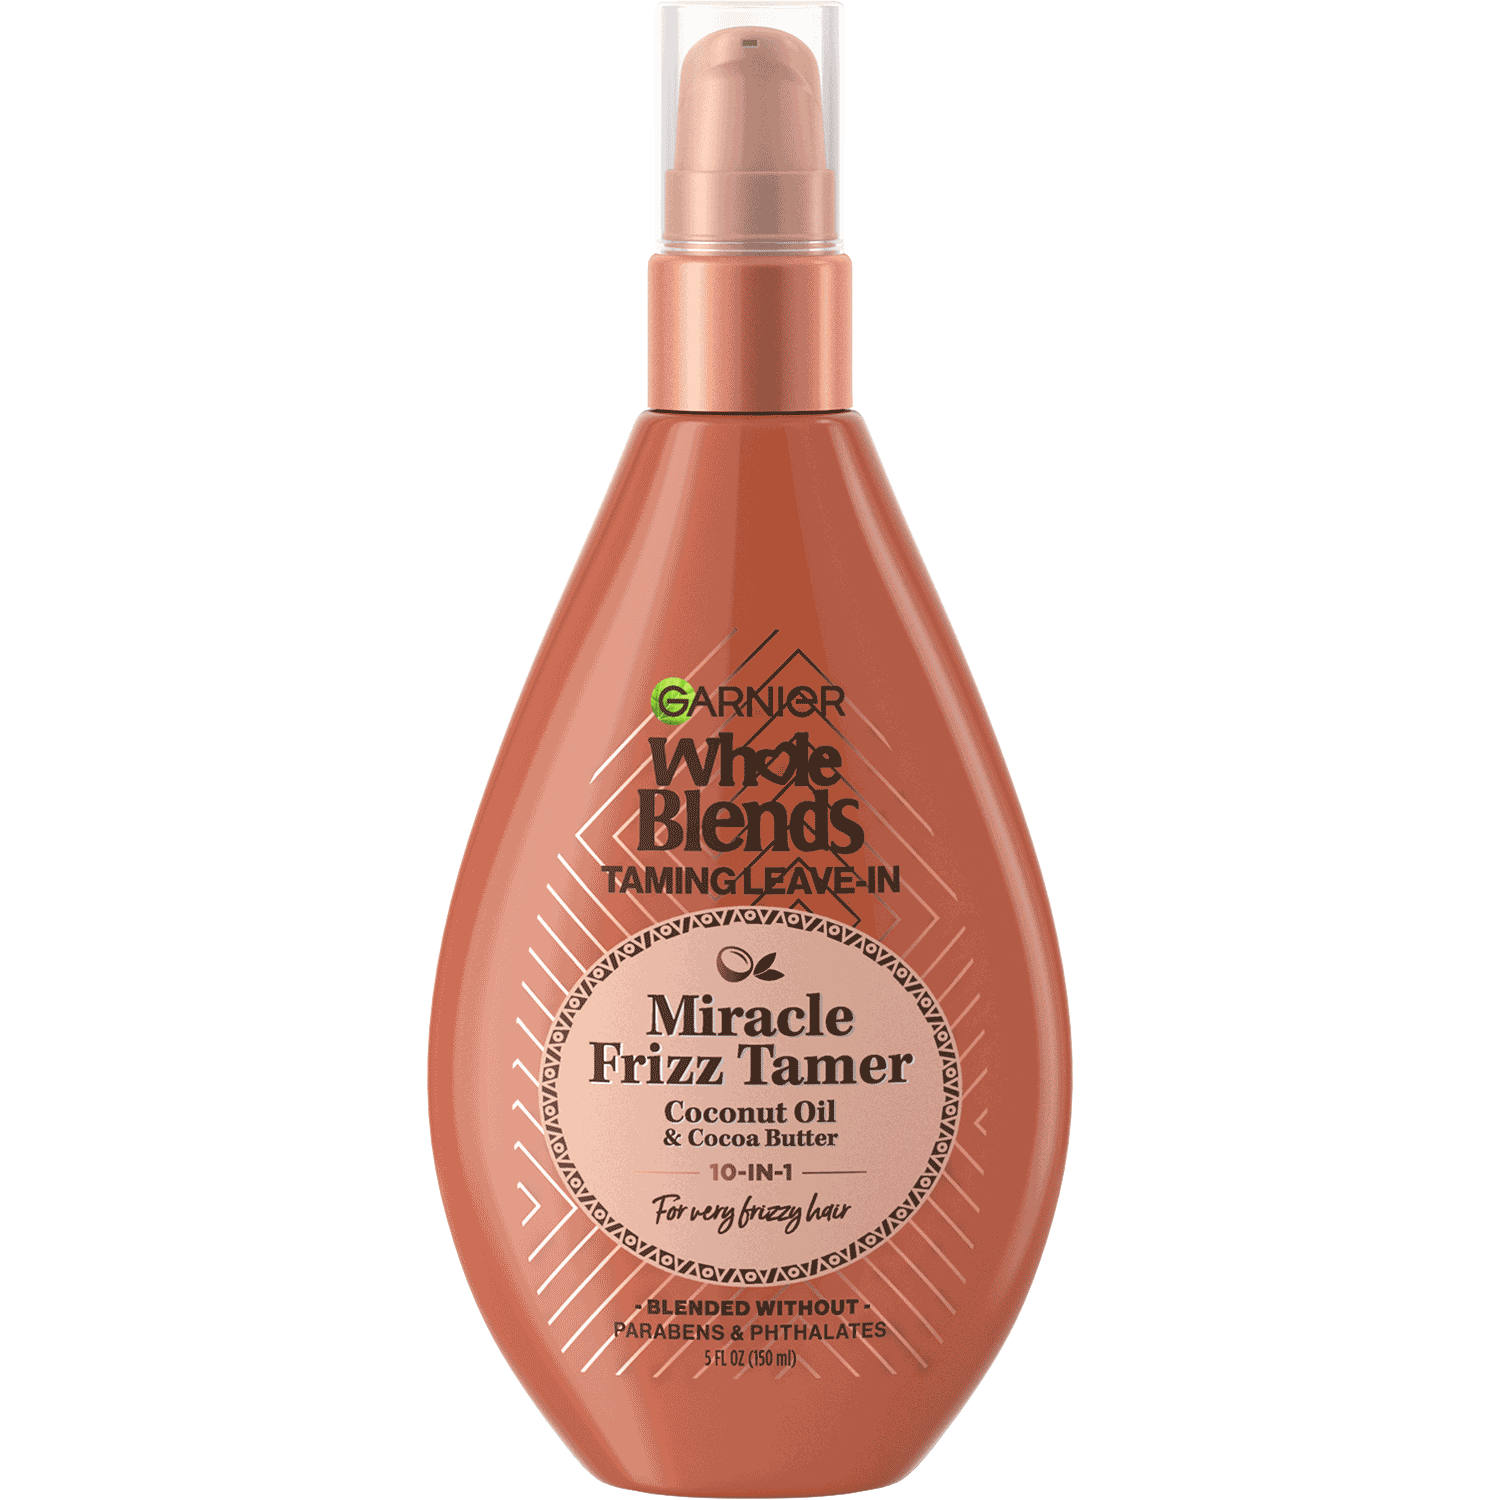 Garnier Whole Blends - Sulfate Free 10 in 1 Coconut front